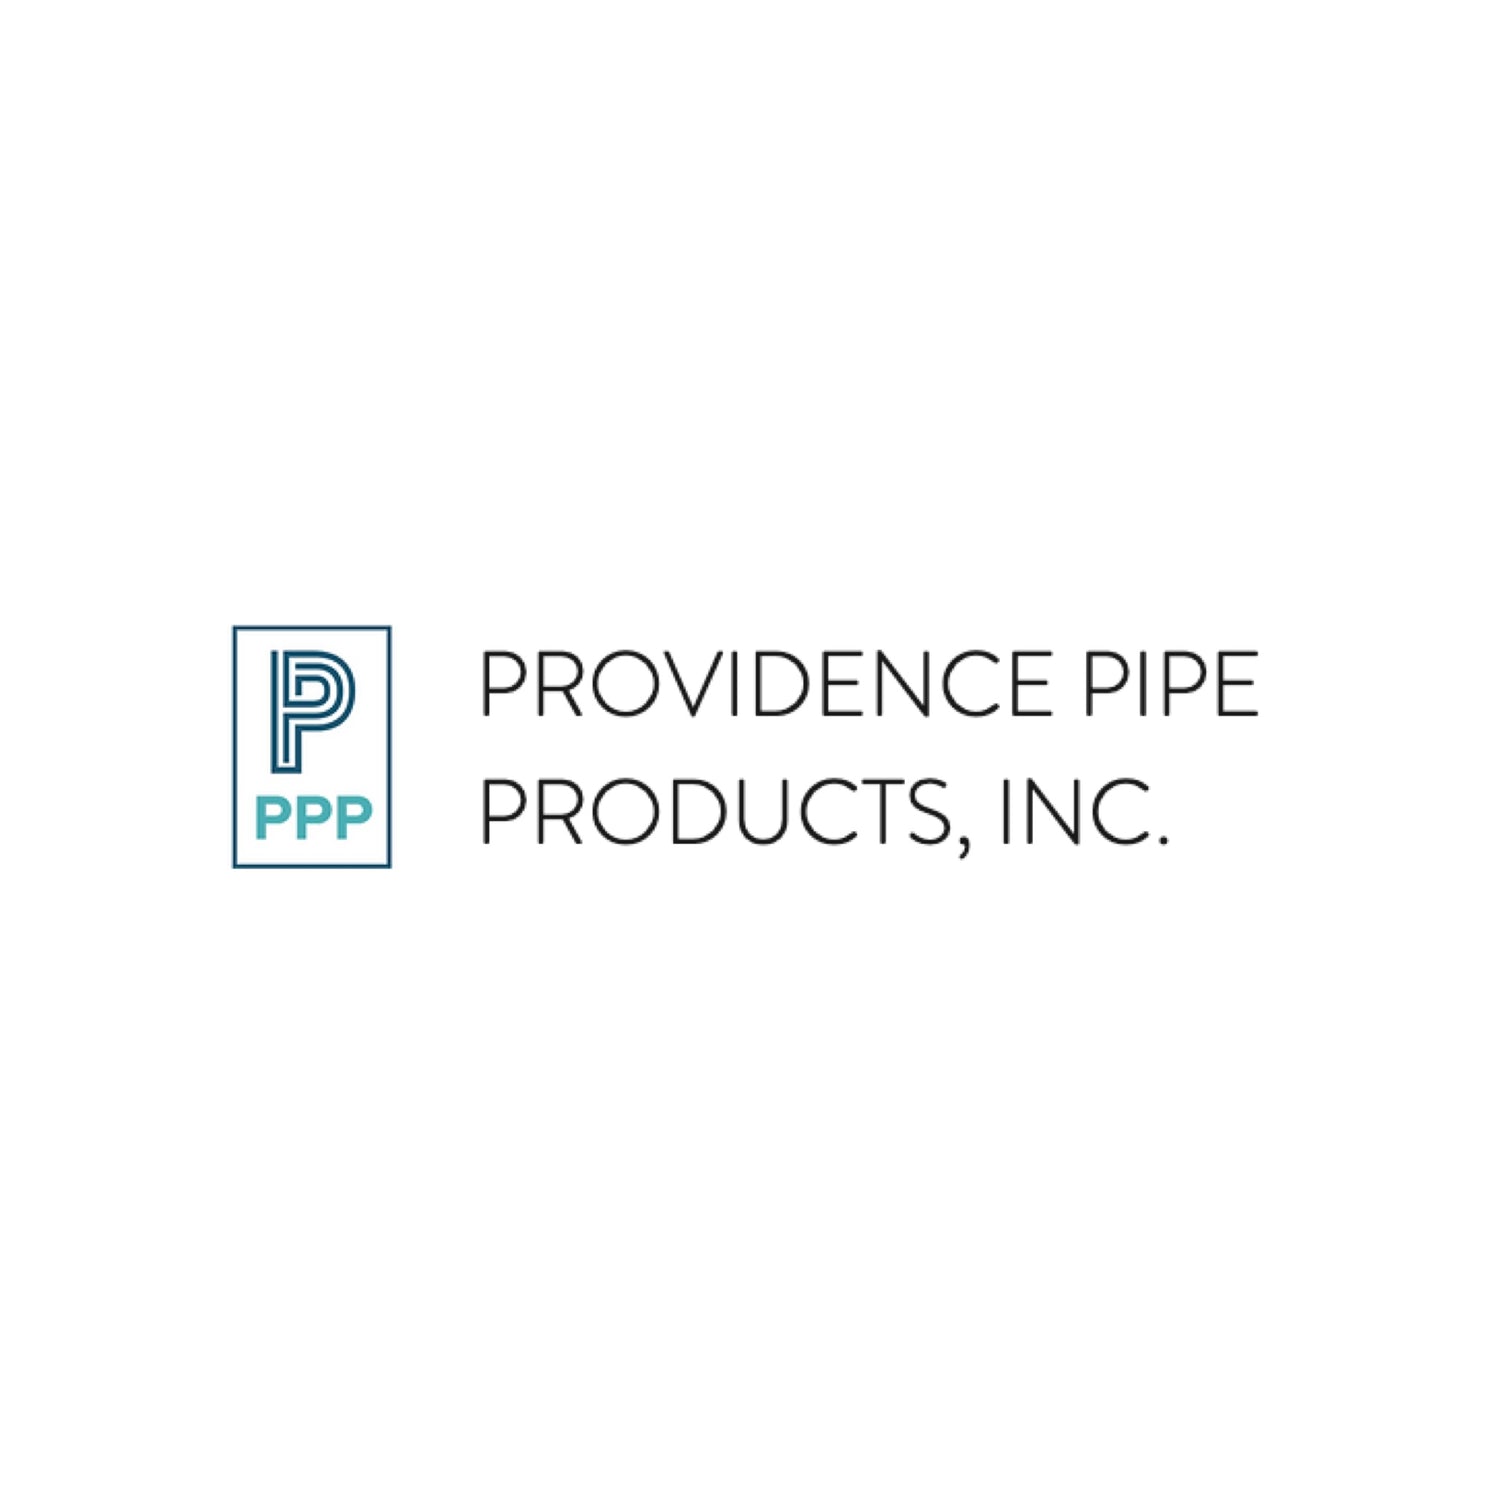 PROVIDENCE PIPE PRODUCTS INC.